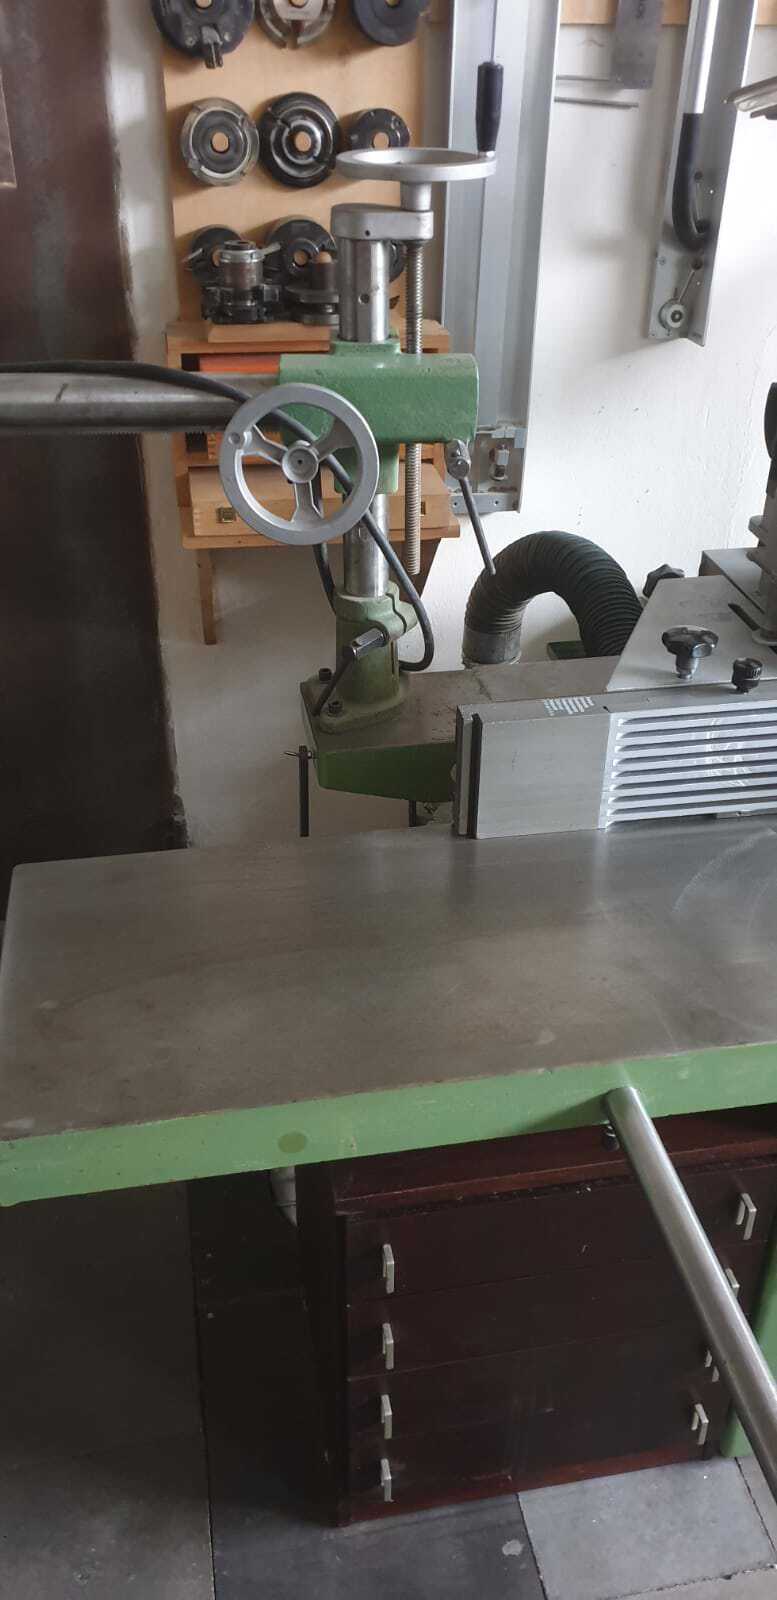 Martin Swivel Spindle Moulder with feed unit and positioning control - second-hand T25 (8)